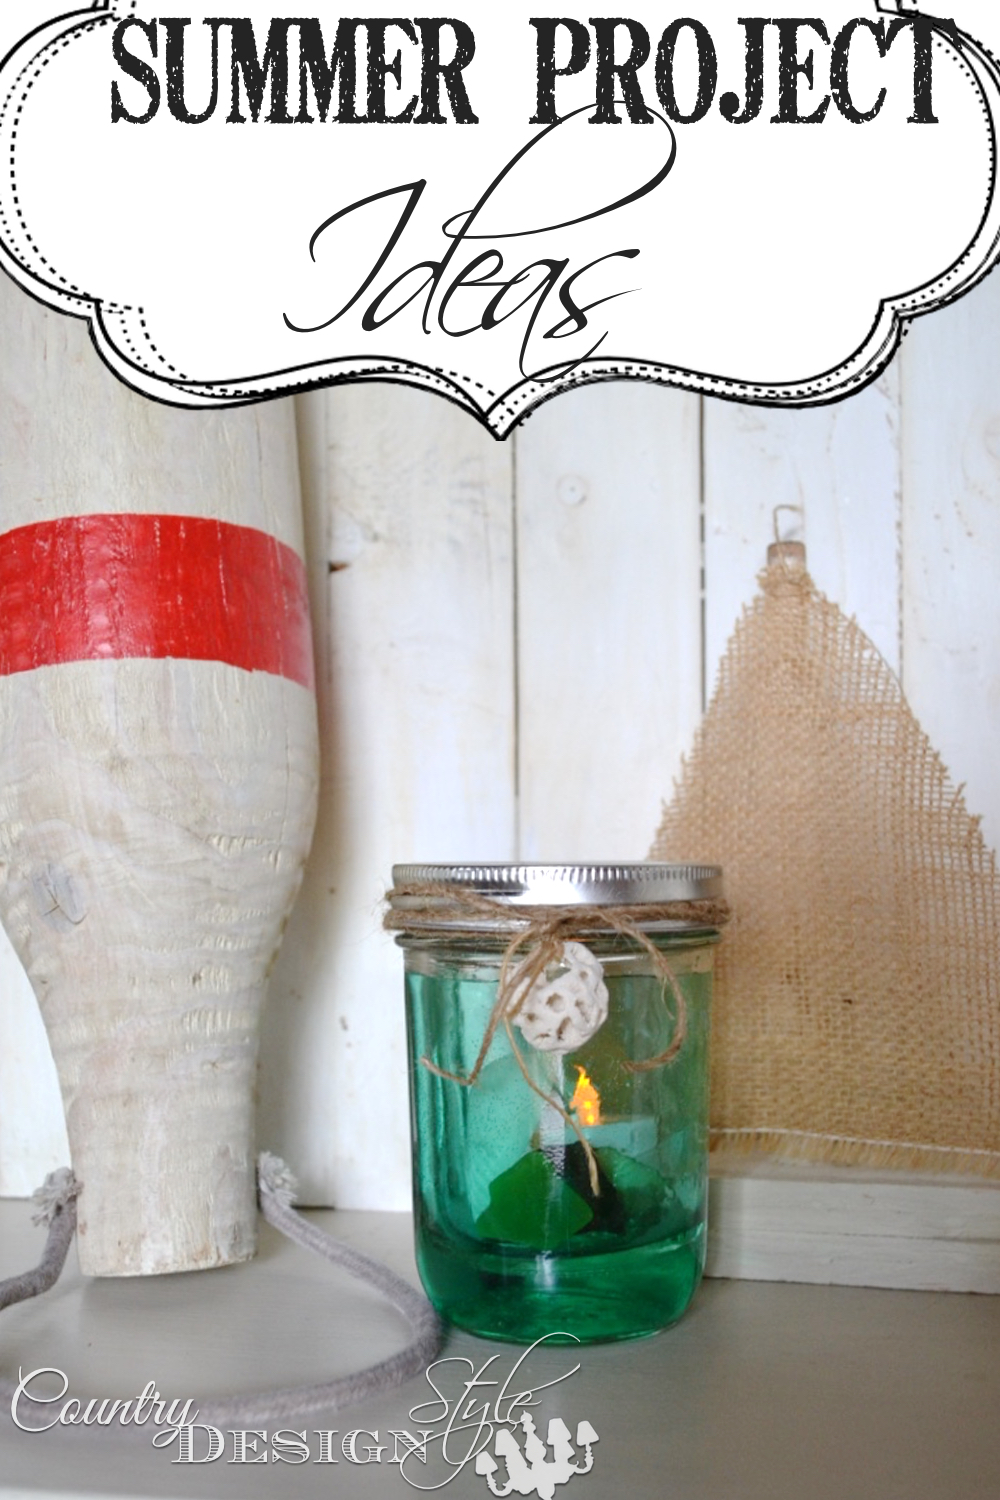 Kids getting restless over summer? Here's some easy summer project ideas. Great for adults and the kiddos. Country Design Style